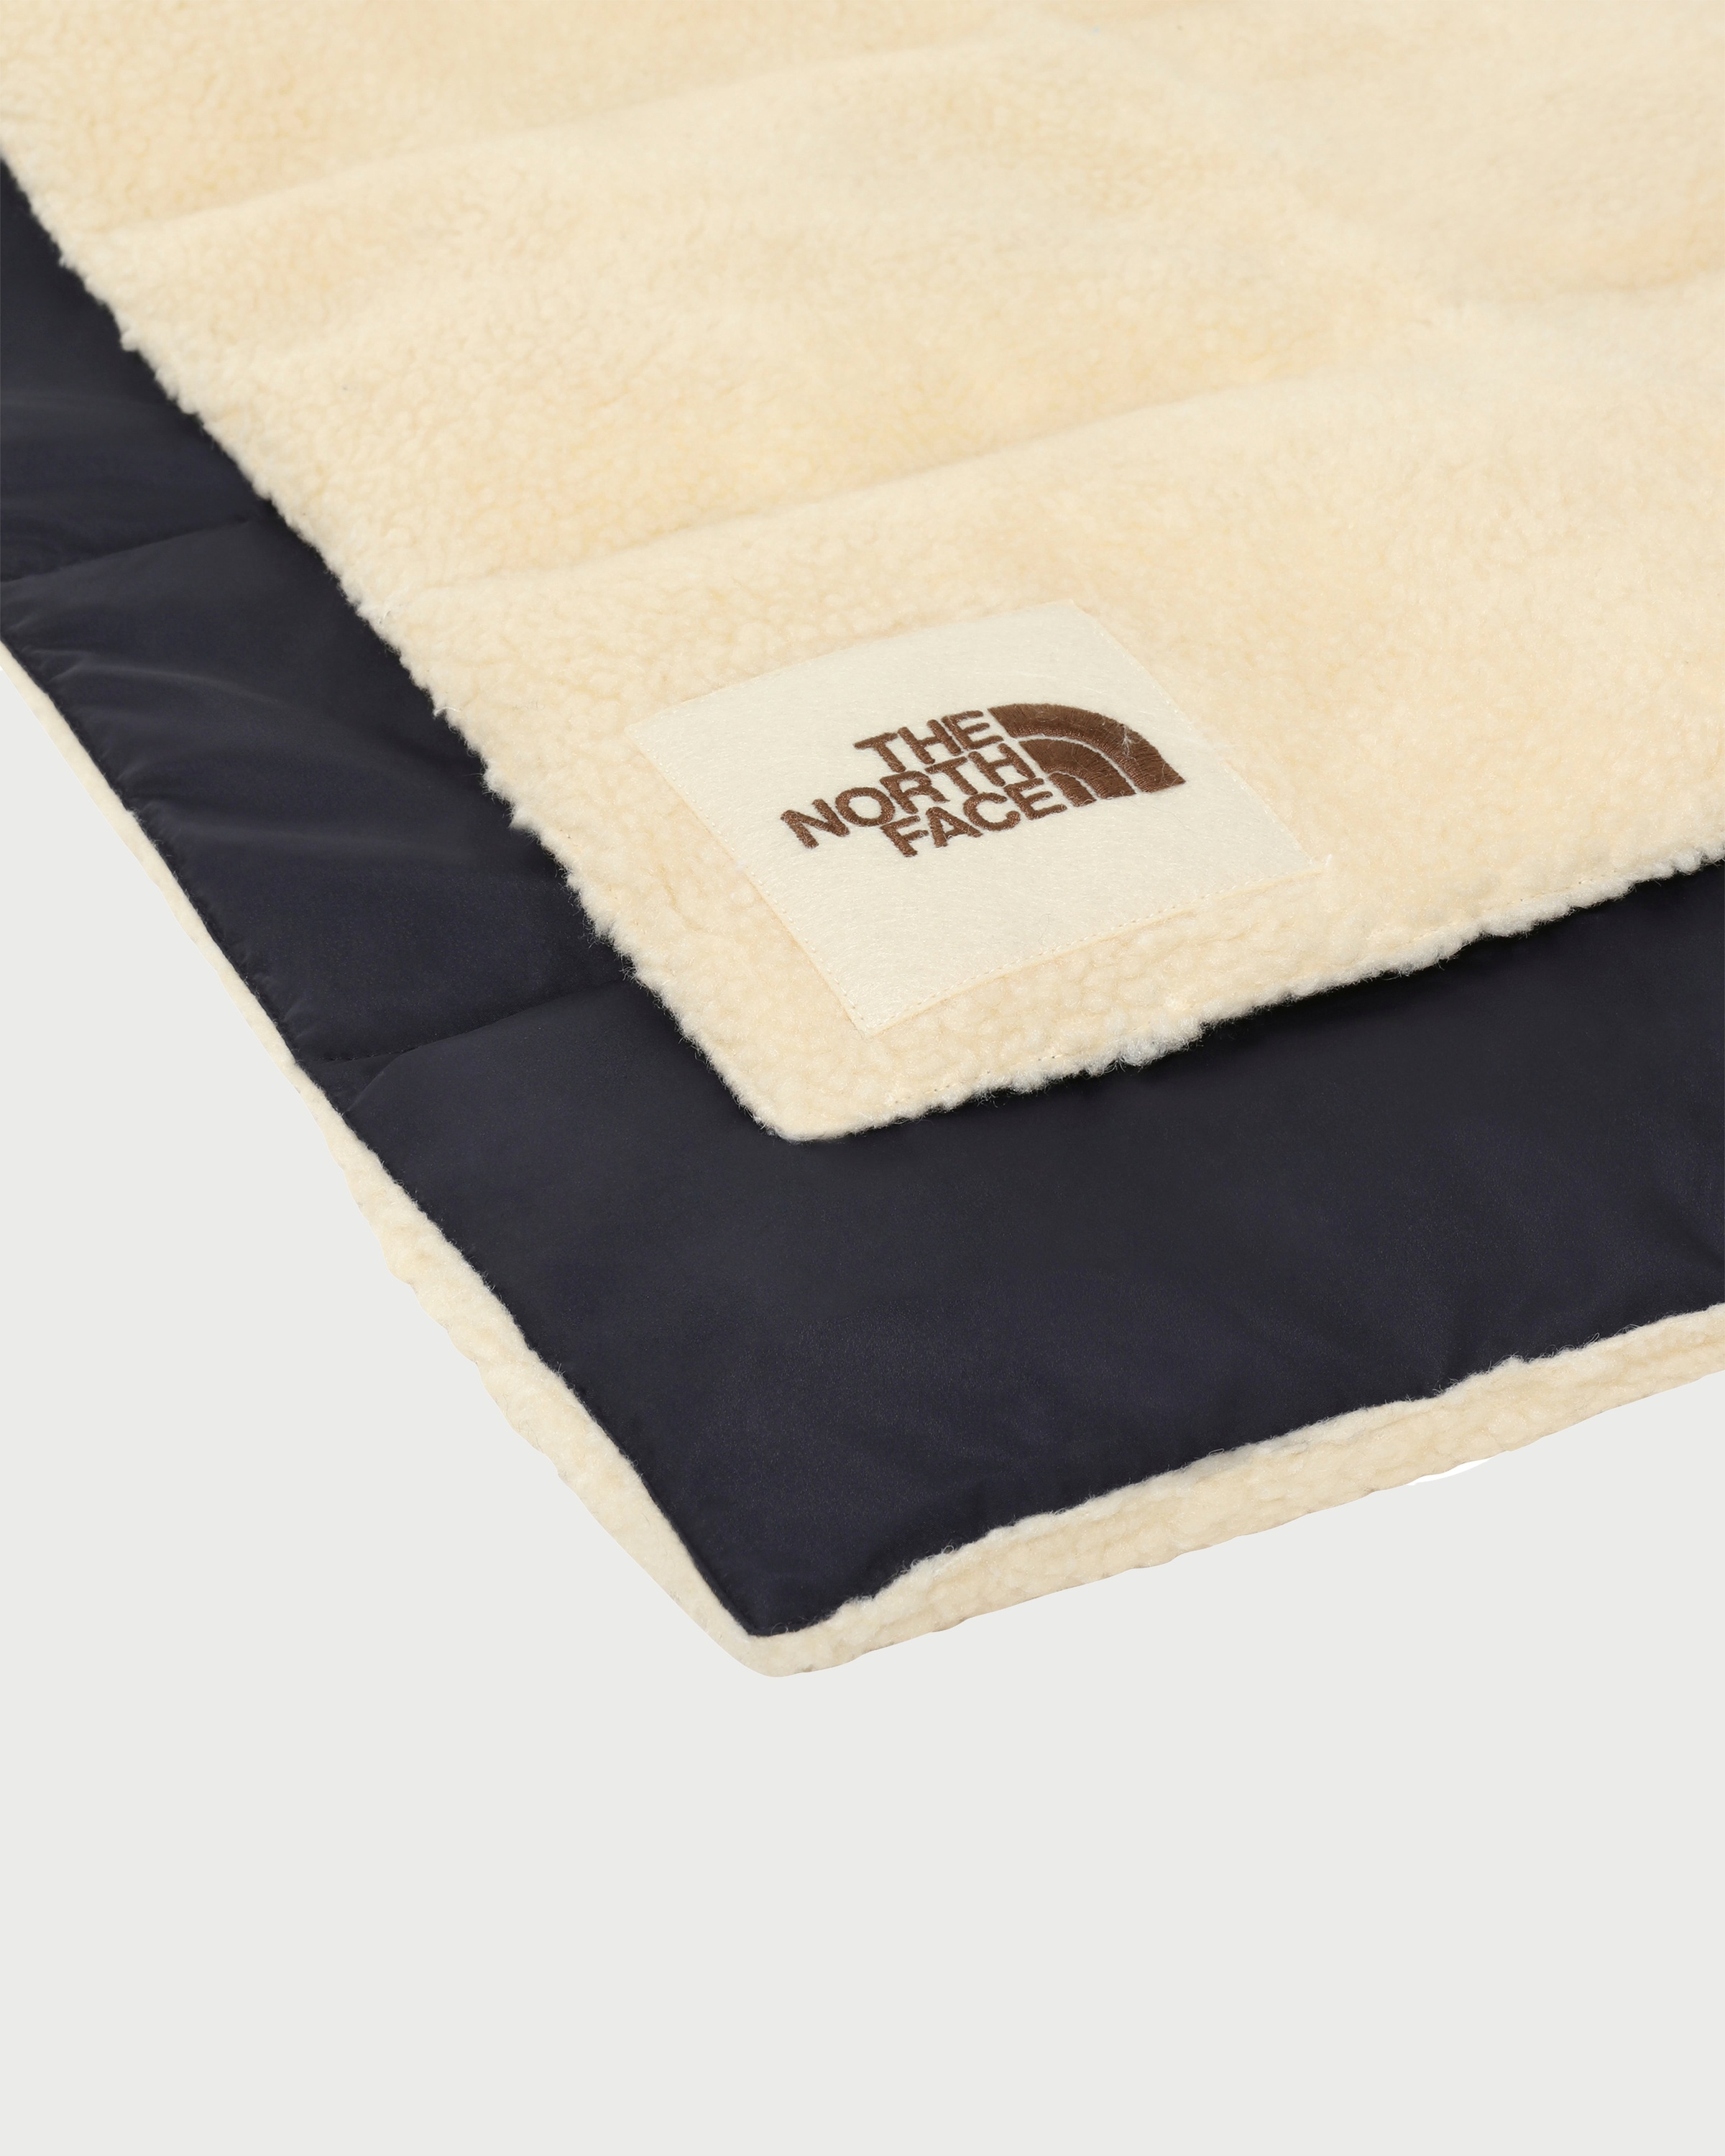 The North Face – Brown Label Insulated Scarf Bleached Sand Unisex - Scarves - Yellow - Image 2